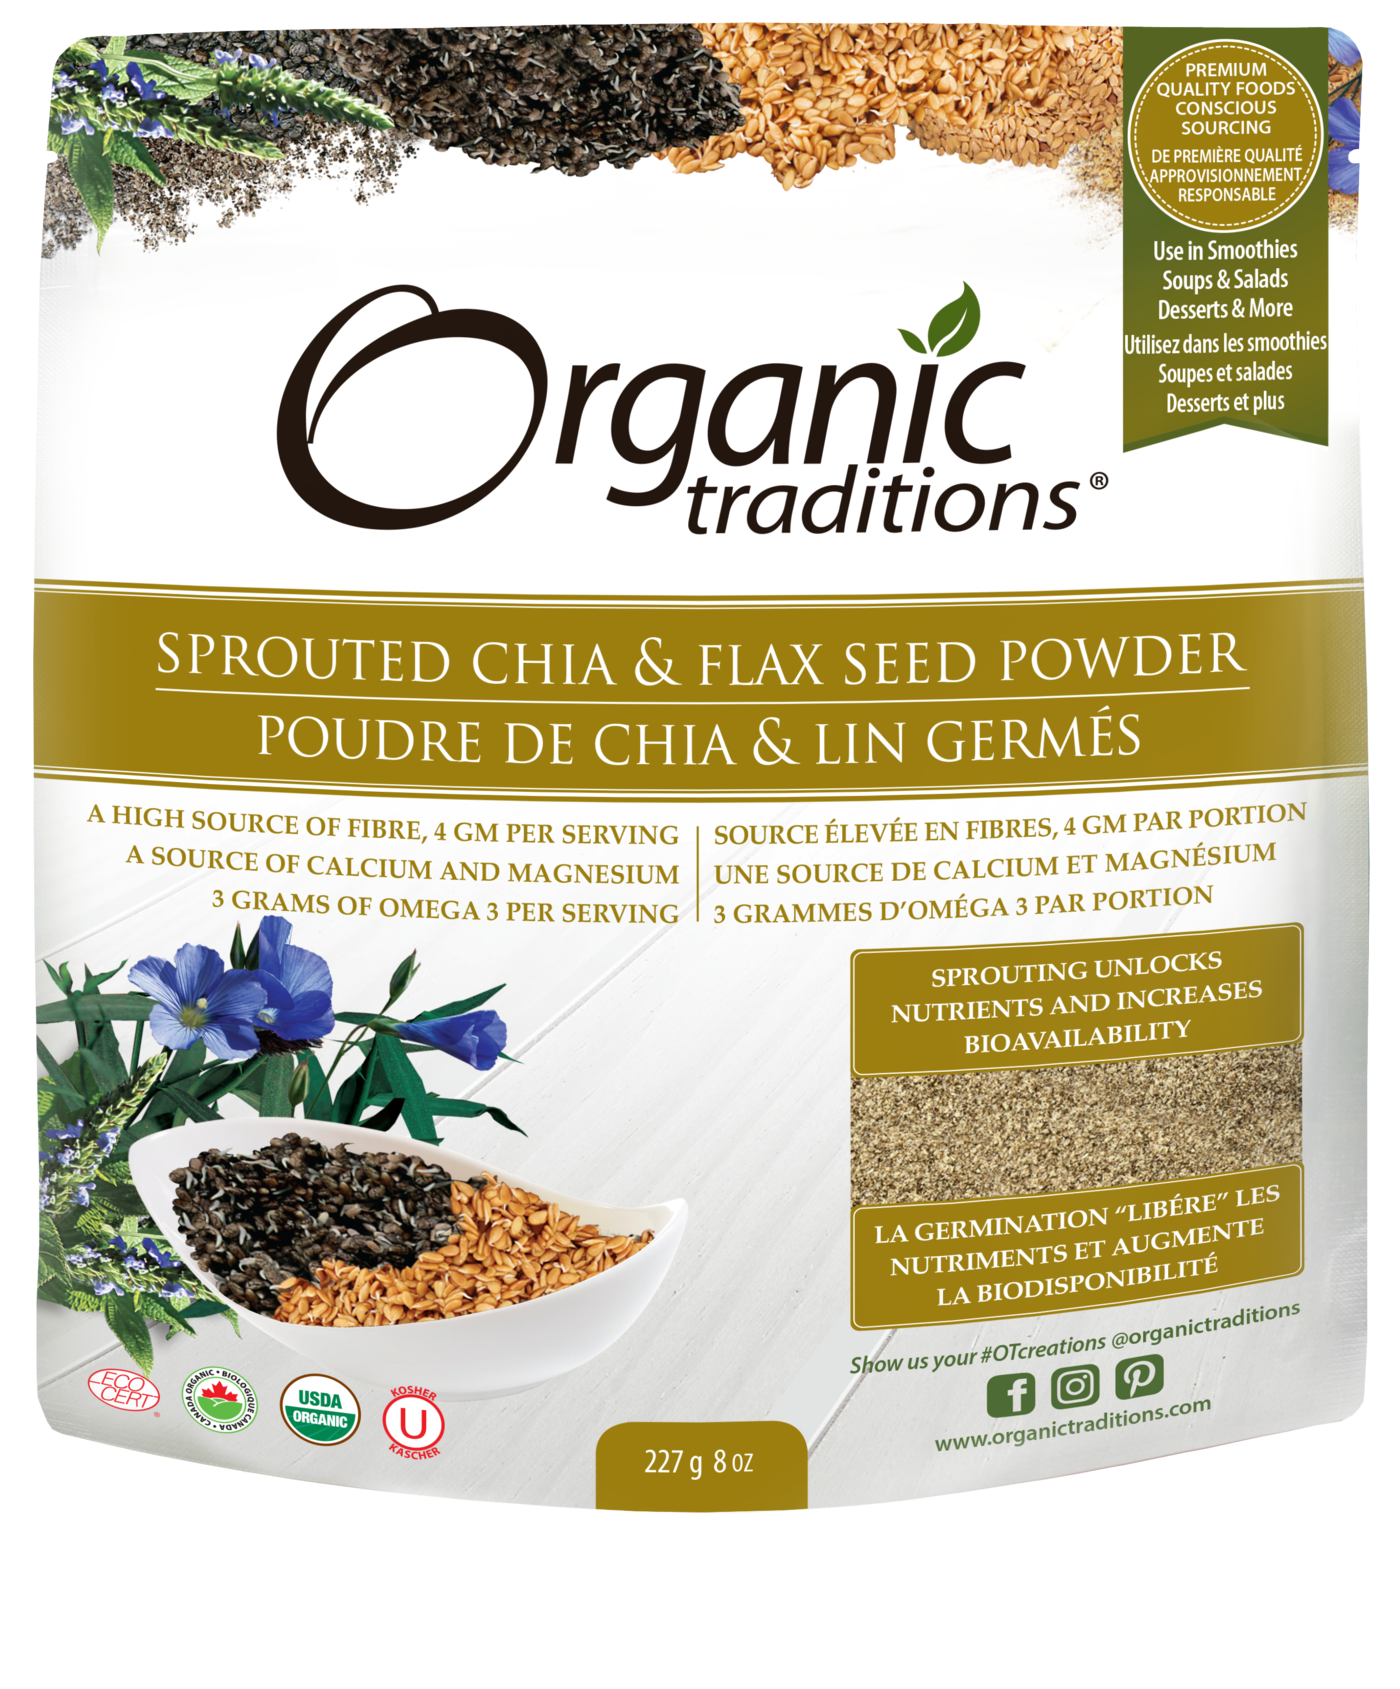 Organic Traditions Sprouted Chia and Flax Seed Powder